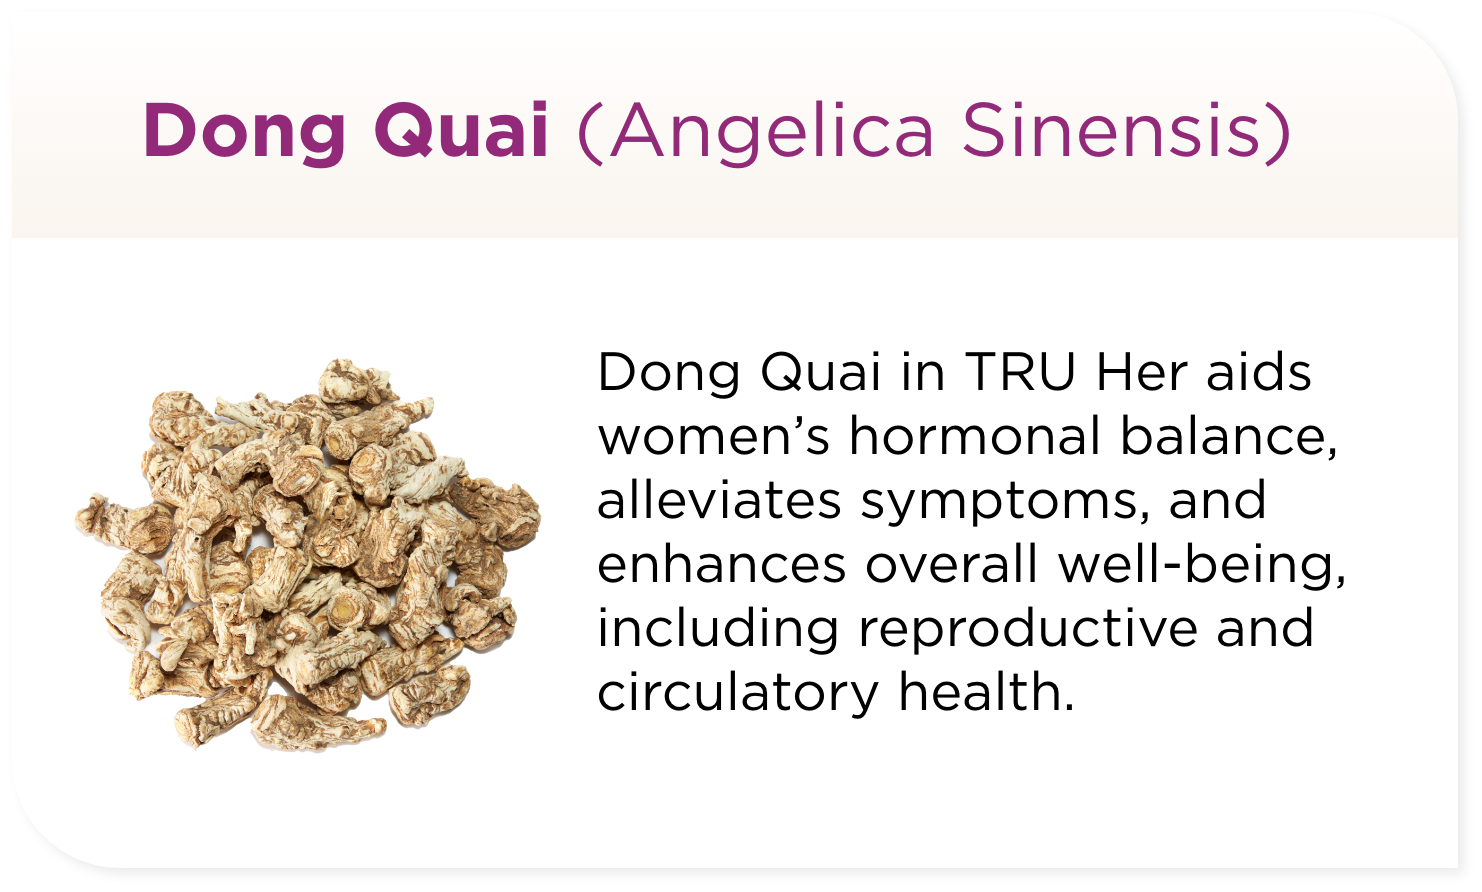 Dong Quai in TRU Her aids women’s hormonal balance, alleviates symptoms, and enhances overall well-being, including reproductive and circulatory health.